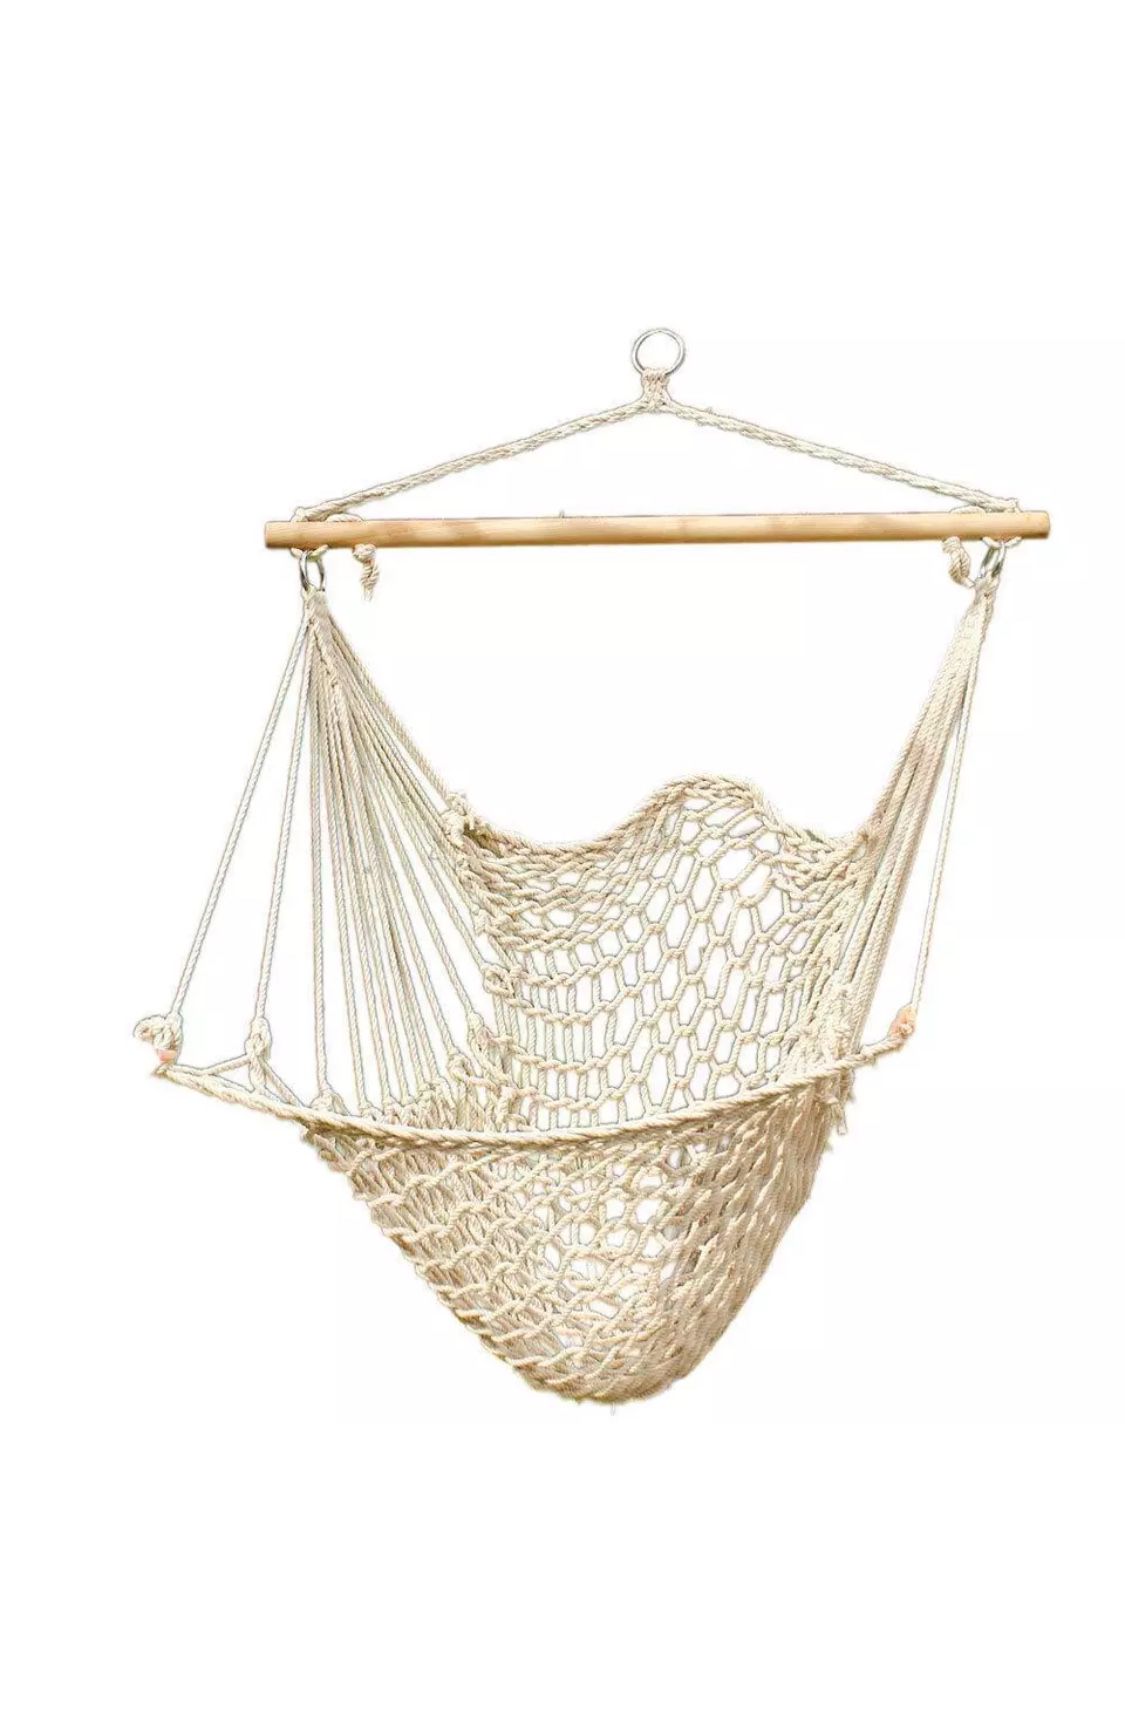 Rope Hammock Swing Seat Cushions Hanging Chair Porch Outdoor Indoor Patio Yard